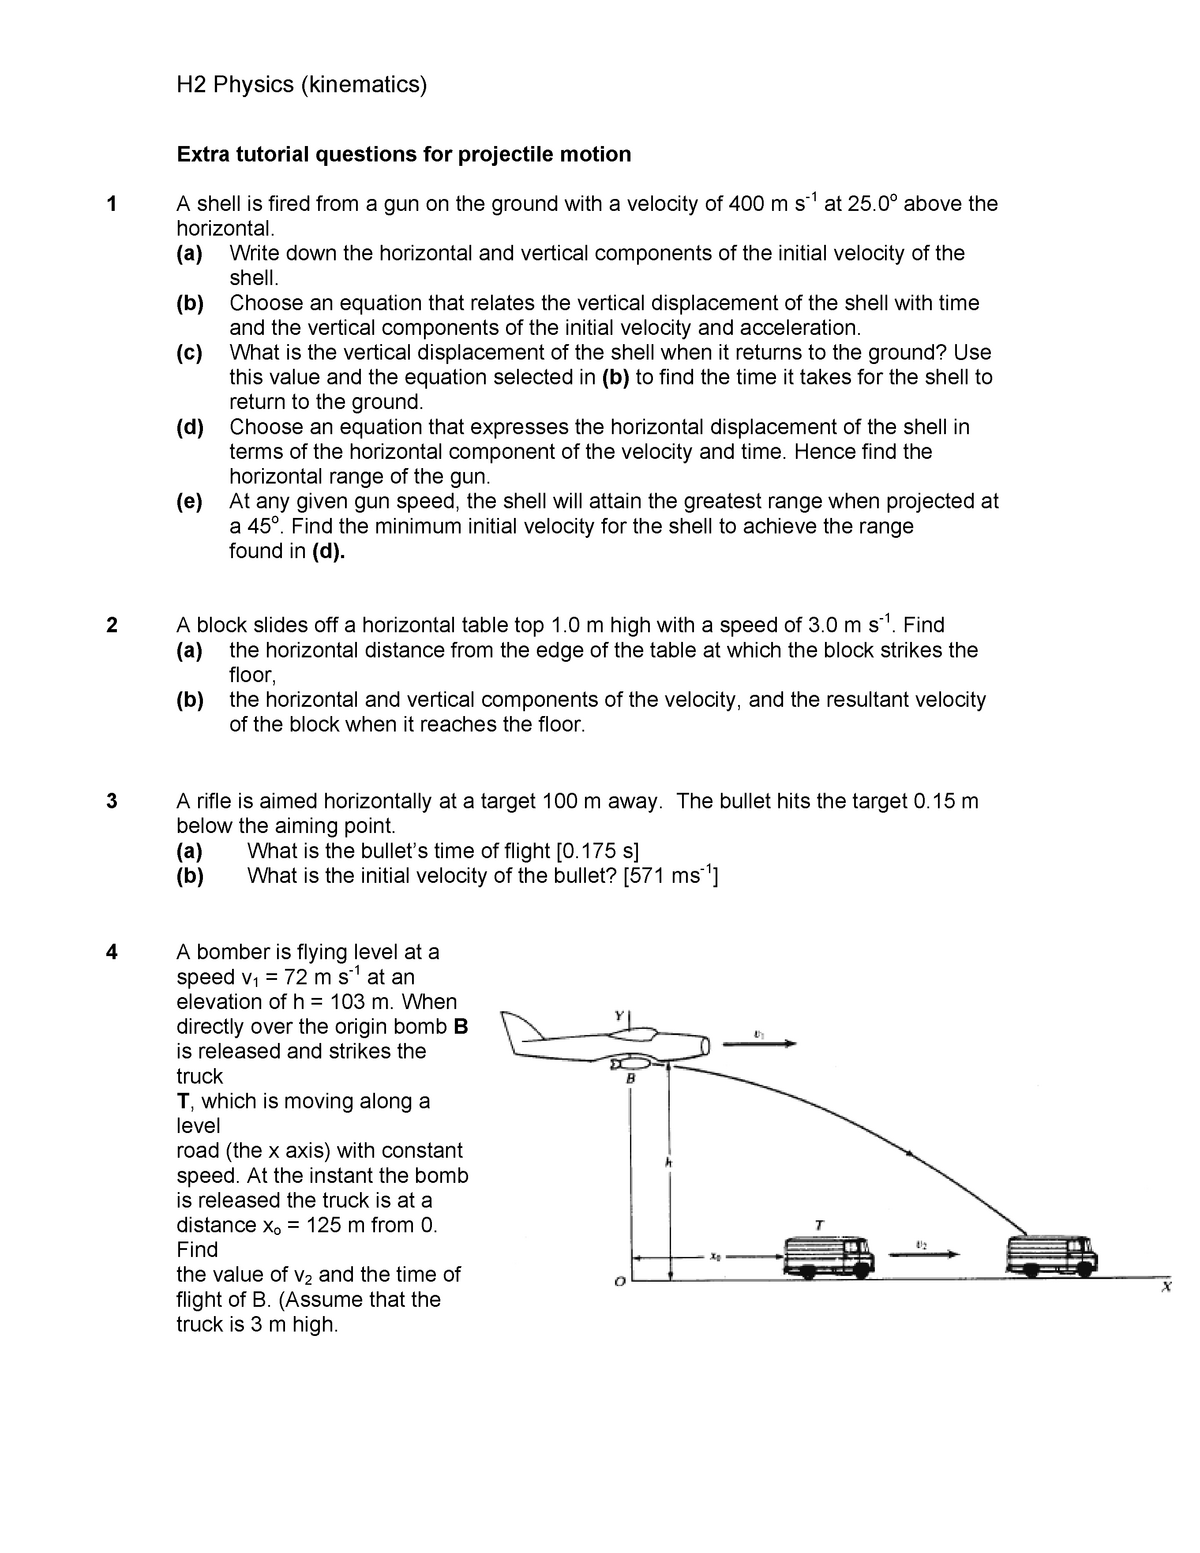 Extra Practice Questions For Projectile Motion H2 Physics Kinematics Extra Tutorial 0490